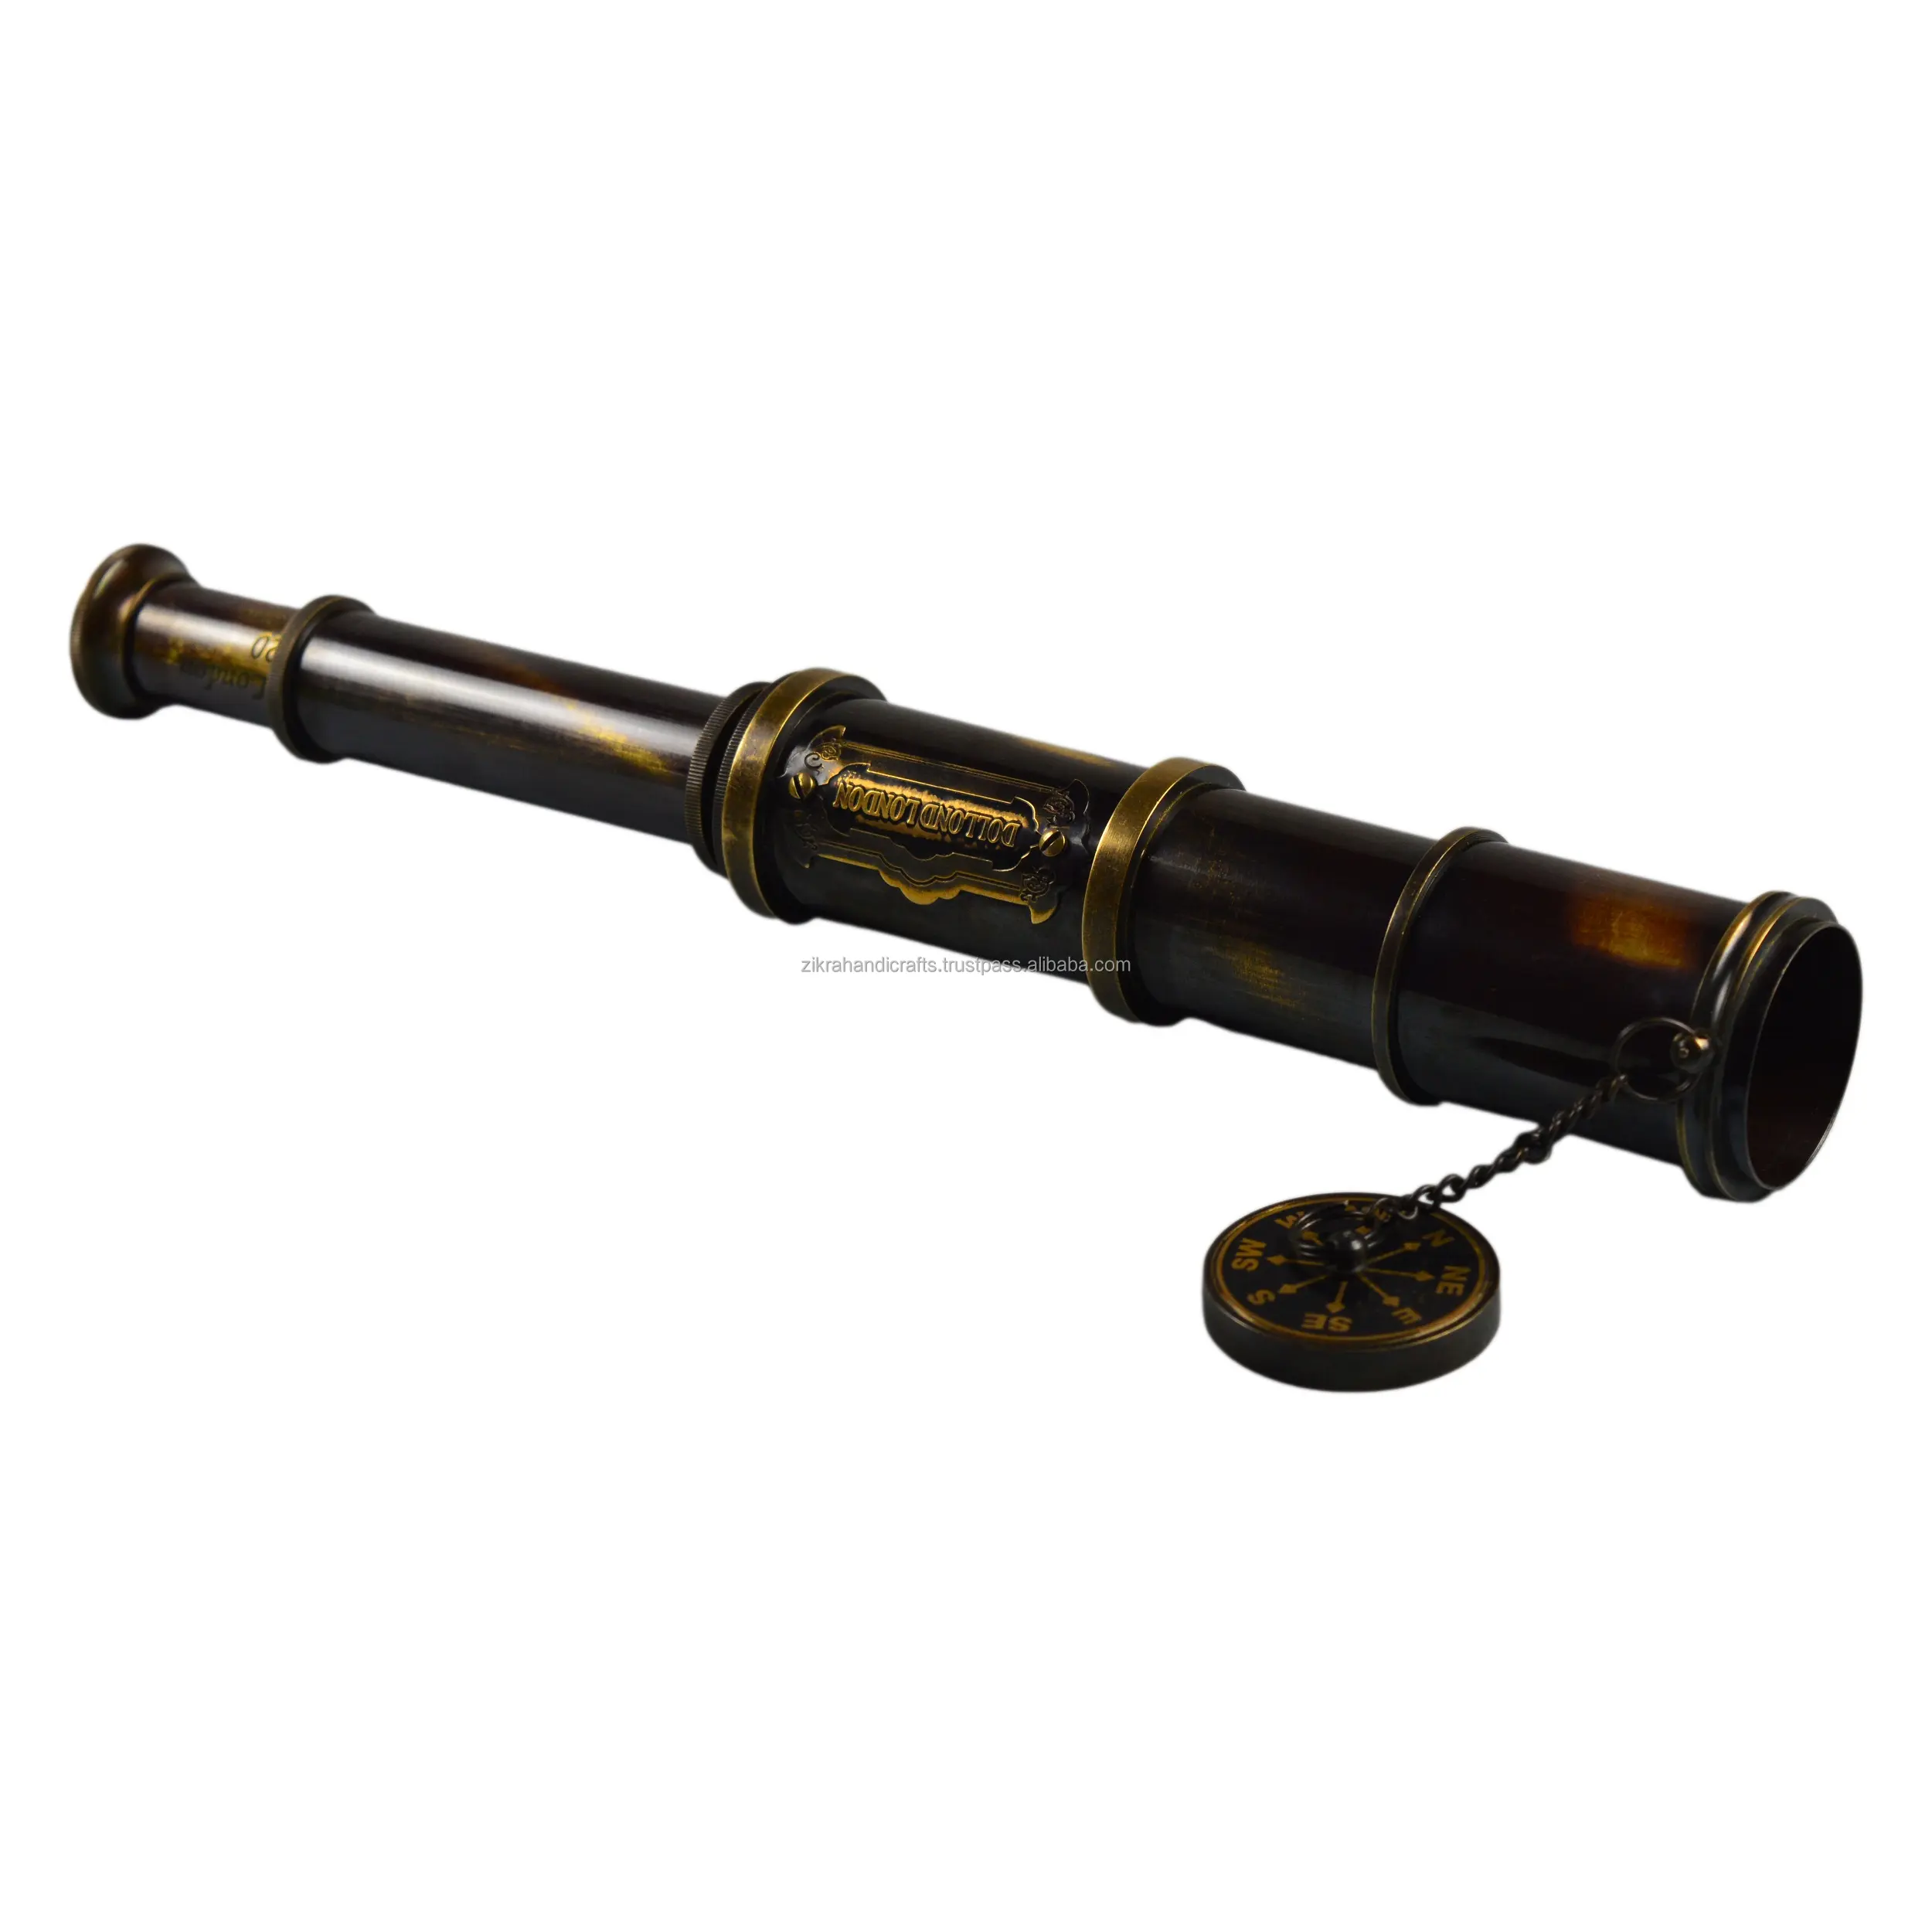 Adjustable Monocular And Telescope With Trendy Antique Design Binoculars Indoor Decor With Multiple Colored Finishing